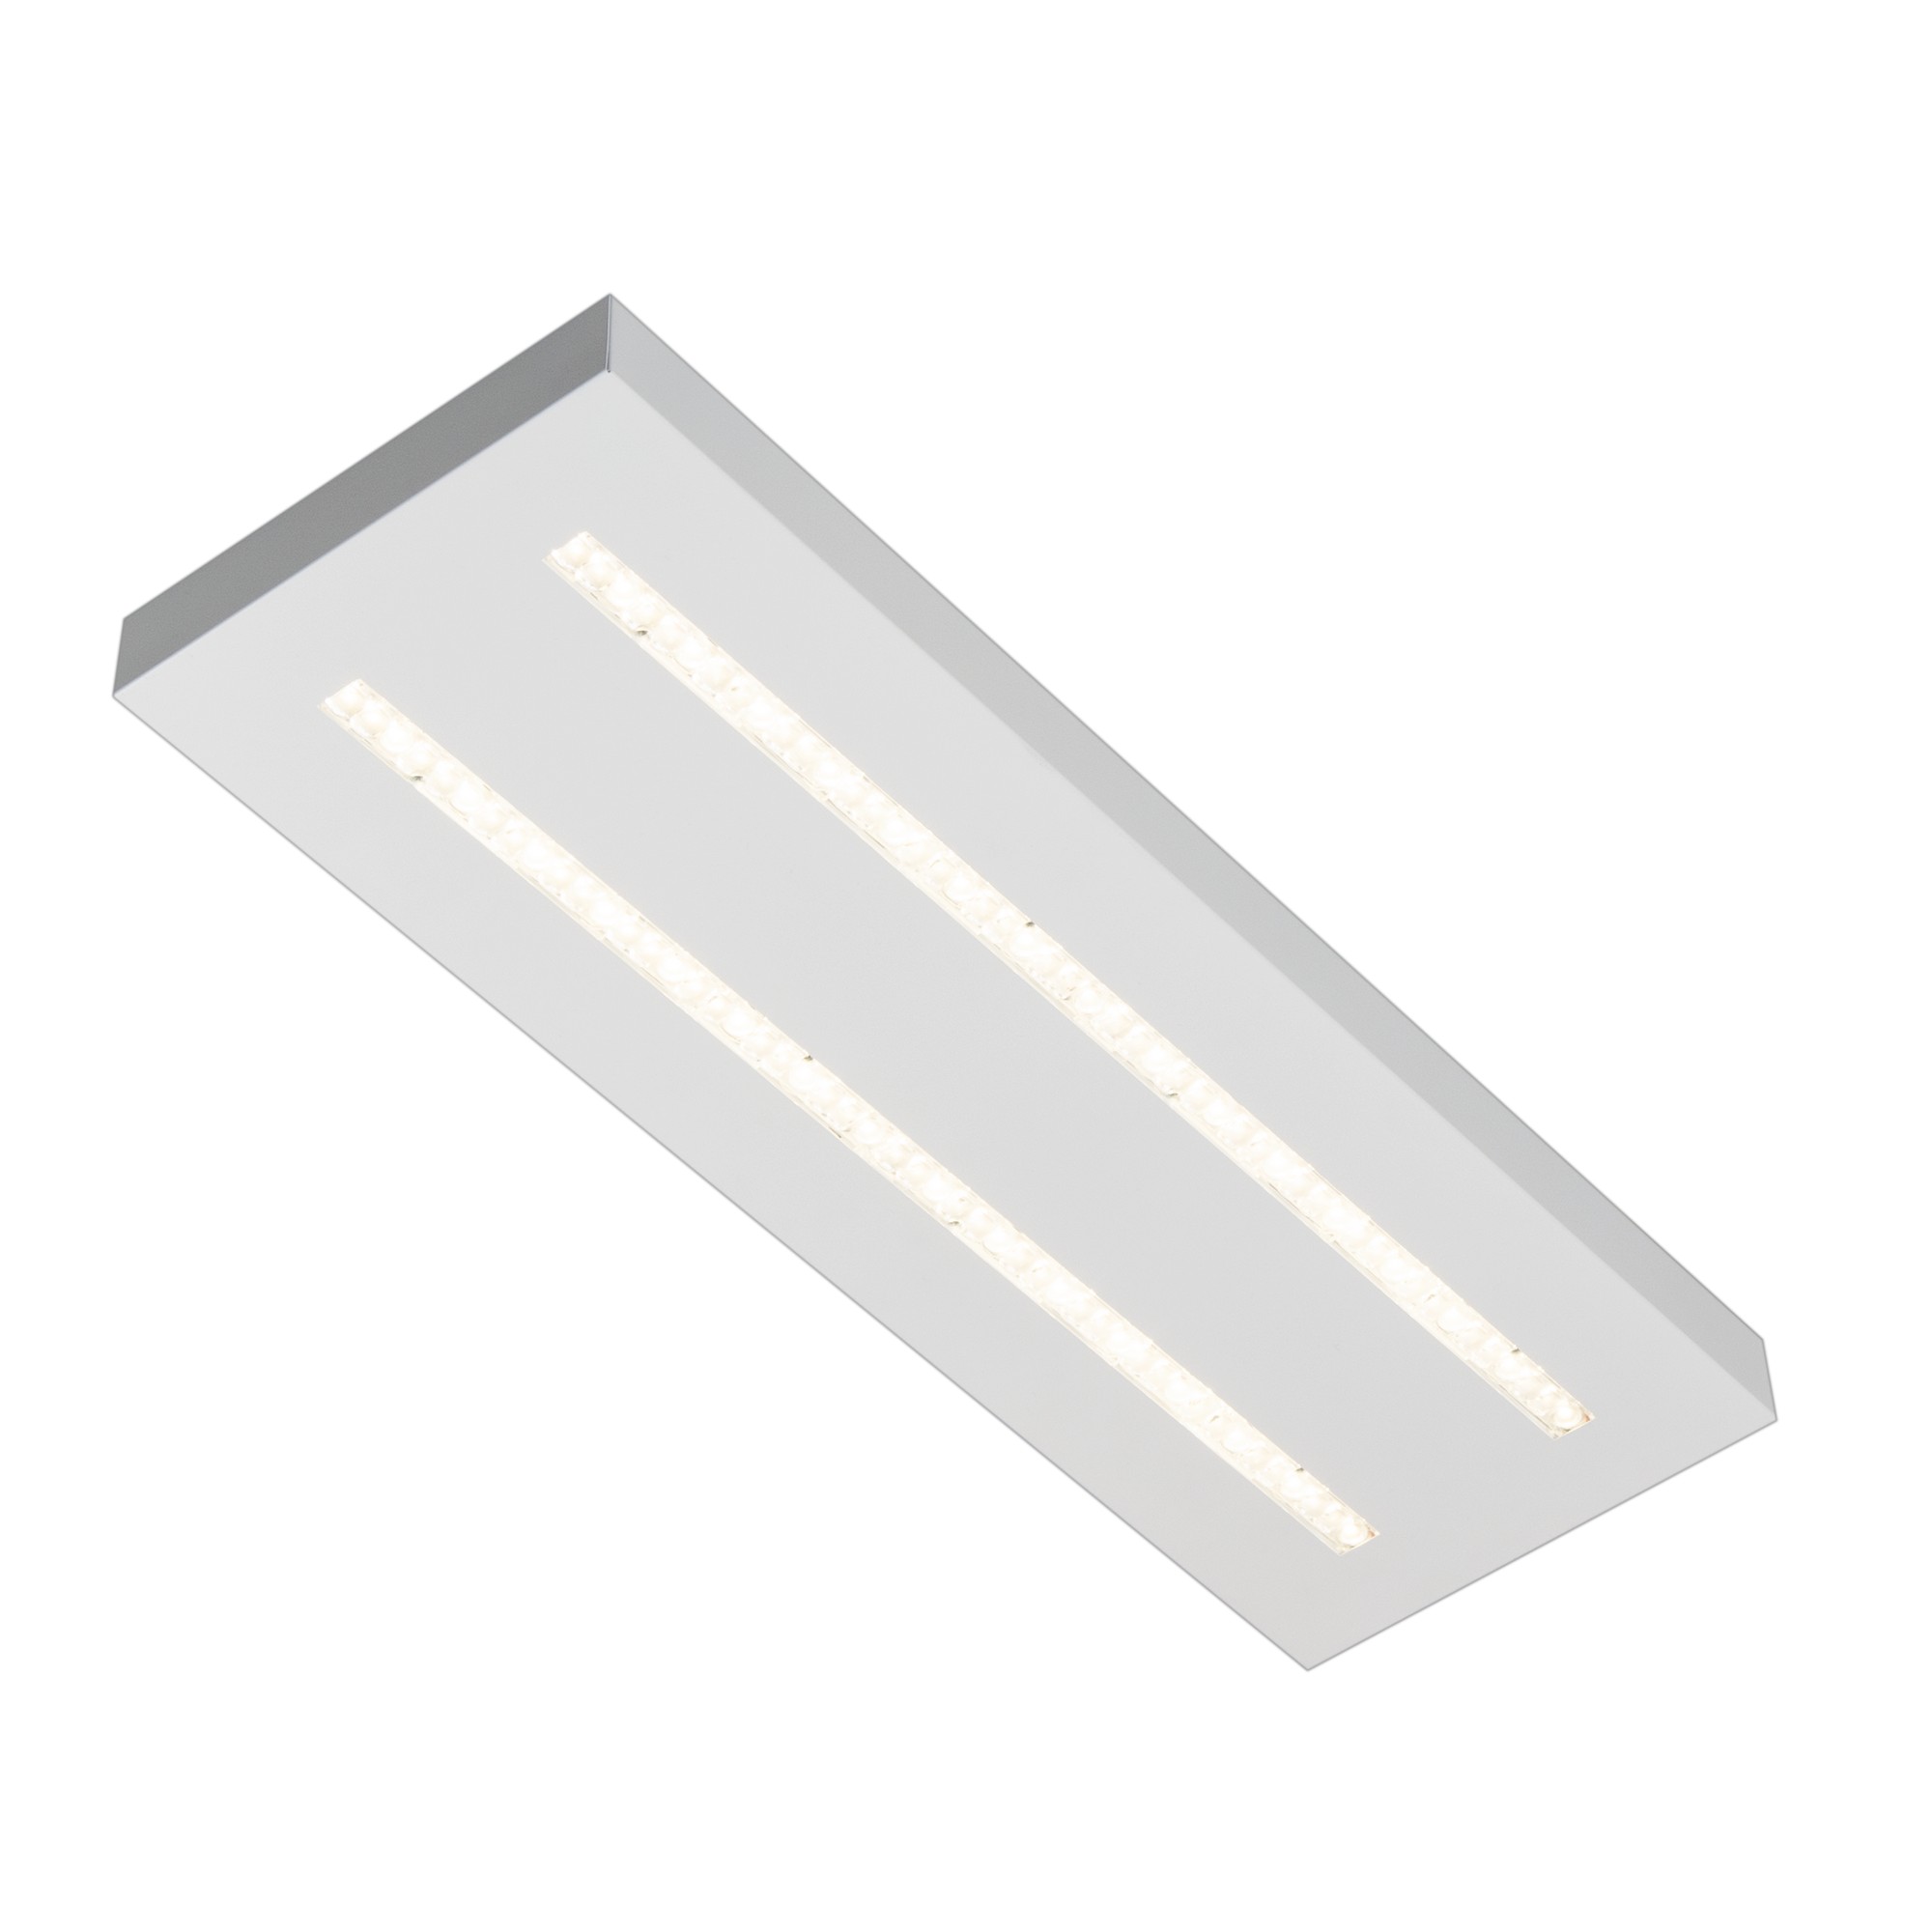 LED-Premium Panel lumEGG EPD/4000/RS/3/Z60/2/ND, 3800lm, 27W, 3000K, ND 